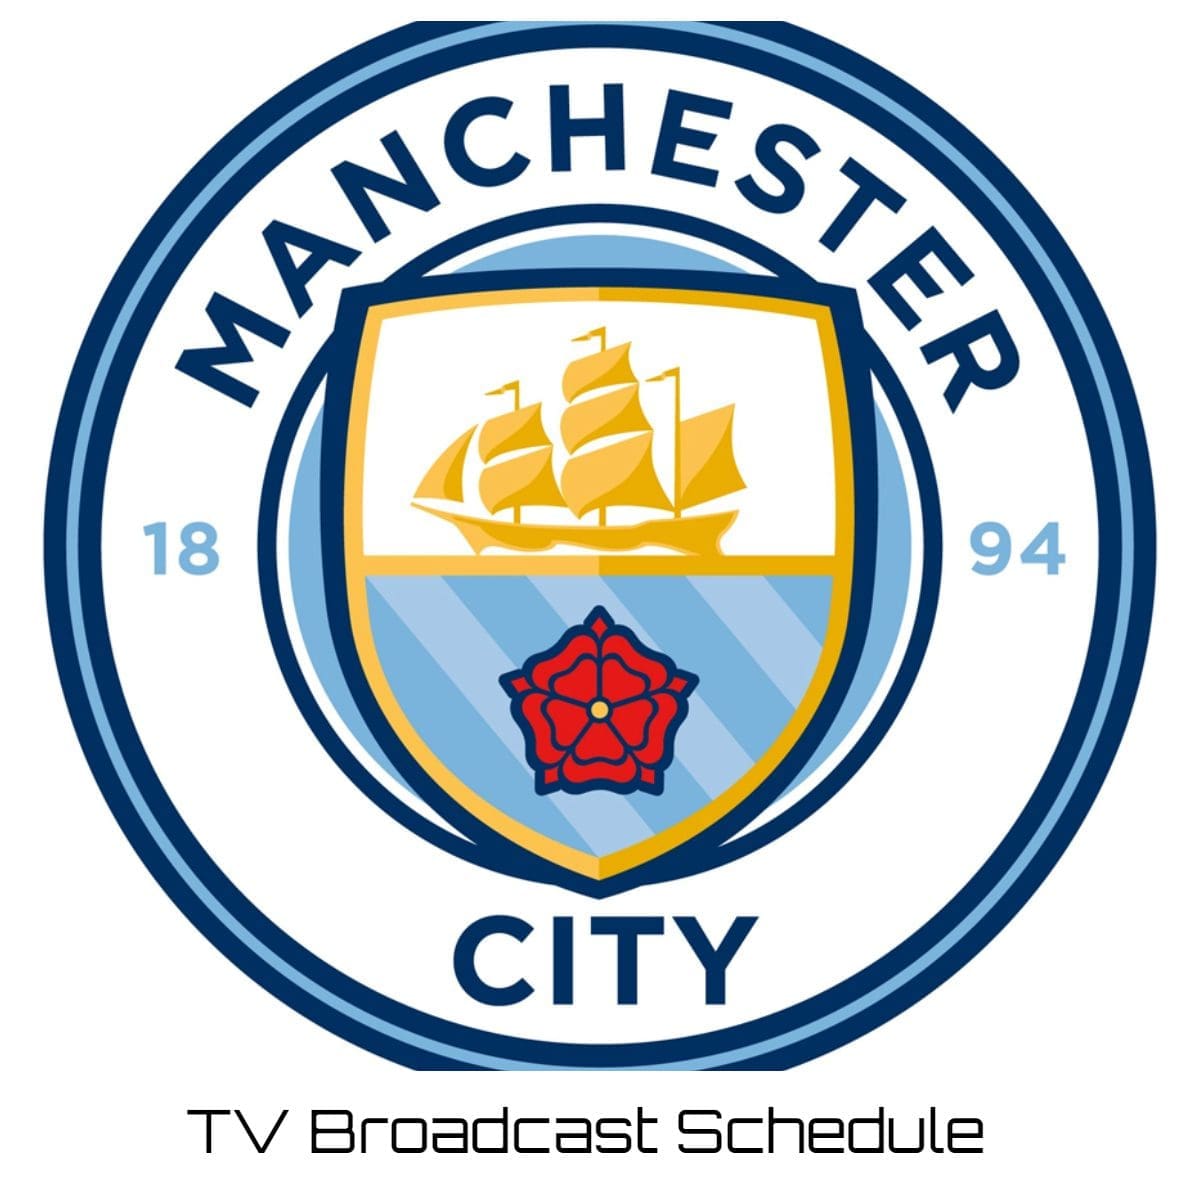 Manchester City TV Broadcast Schedule